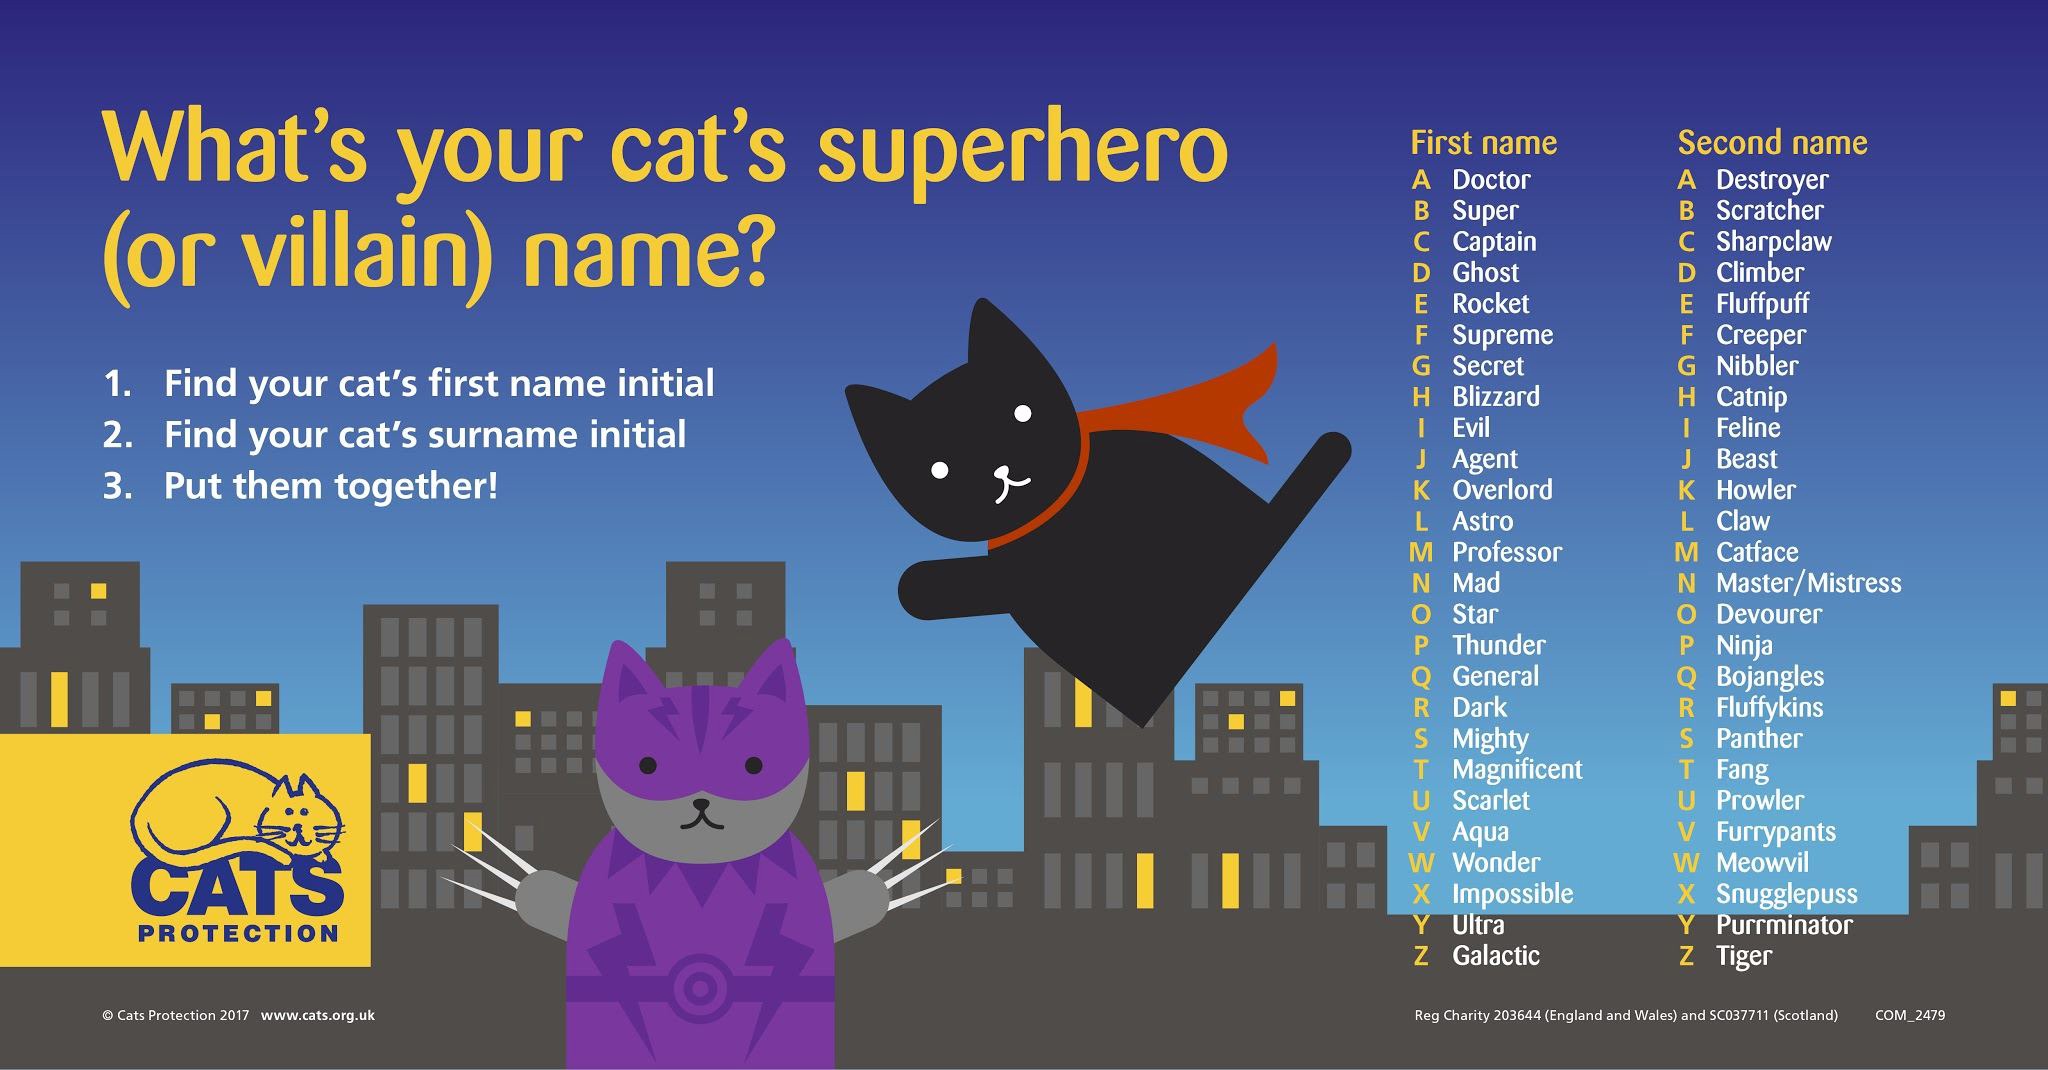 Guide to finding out your cat’s superhero name